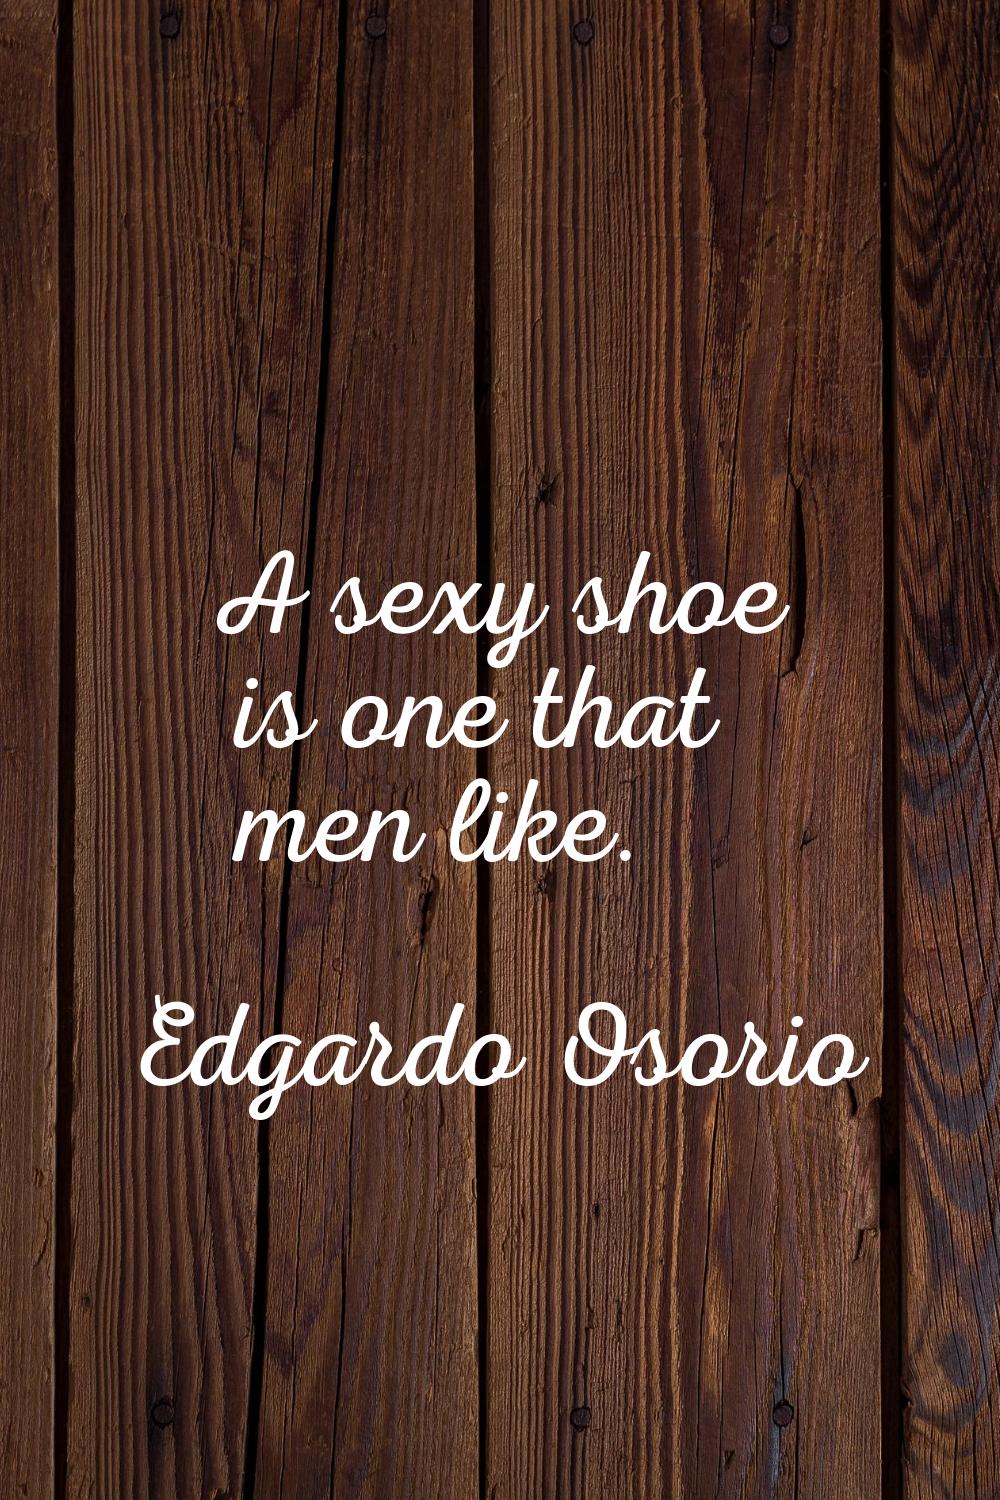 A sexy shoe is one that men like.